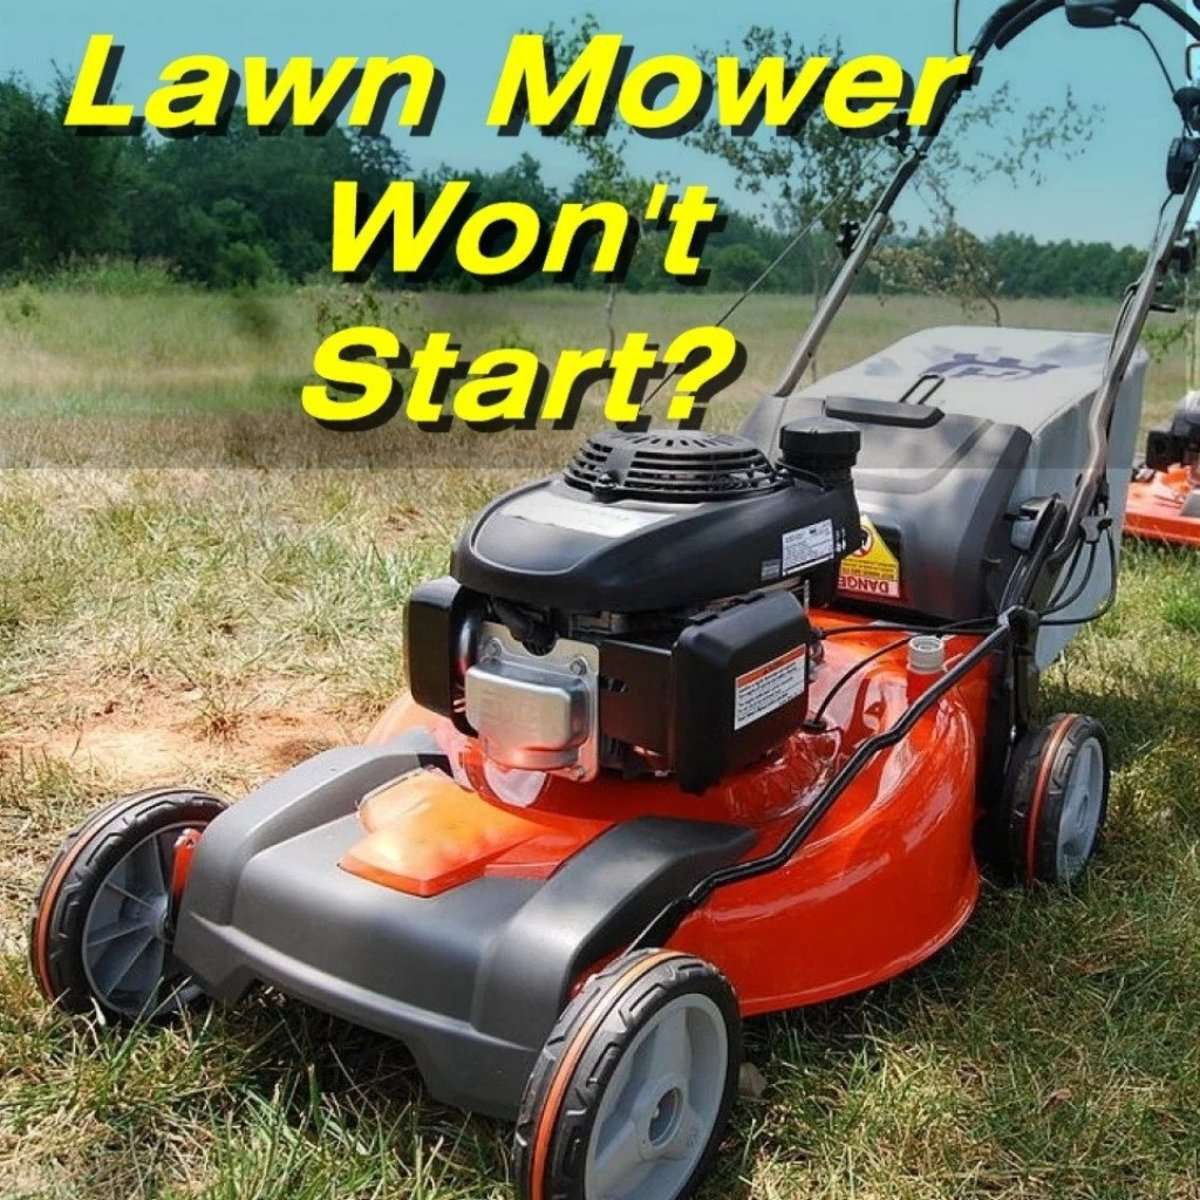 How to Fix a Lawn Mower That Won